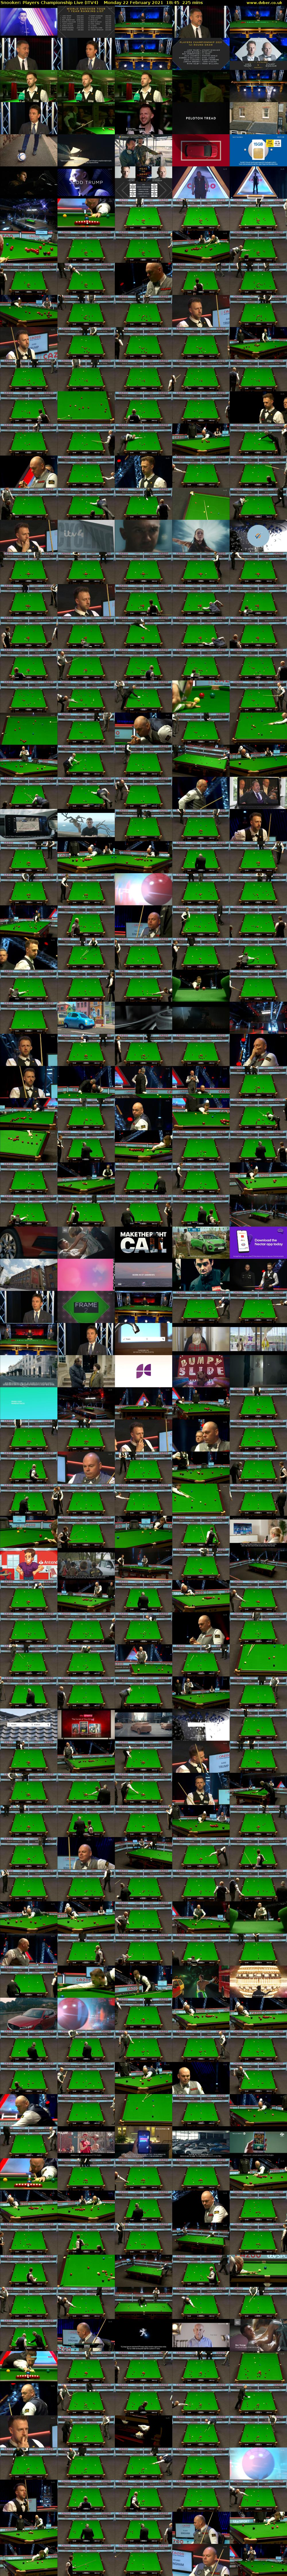 Snooker: Players Championship Live (ITV4) Monday 22 February 2021 18:45 - 22:30